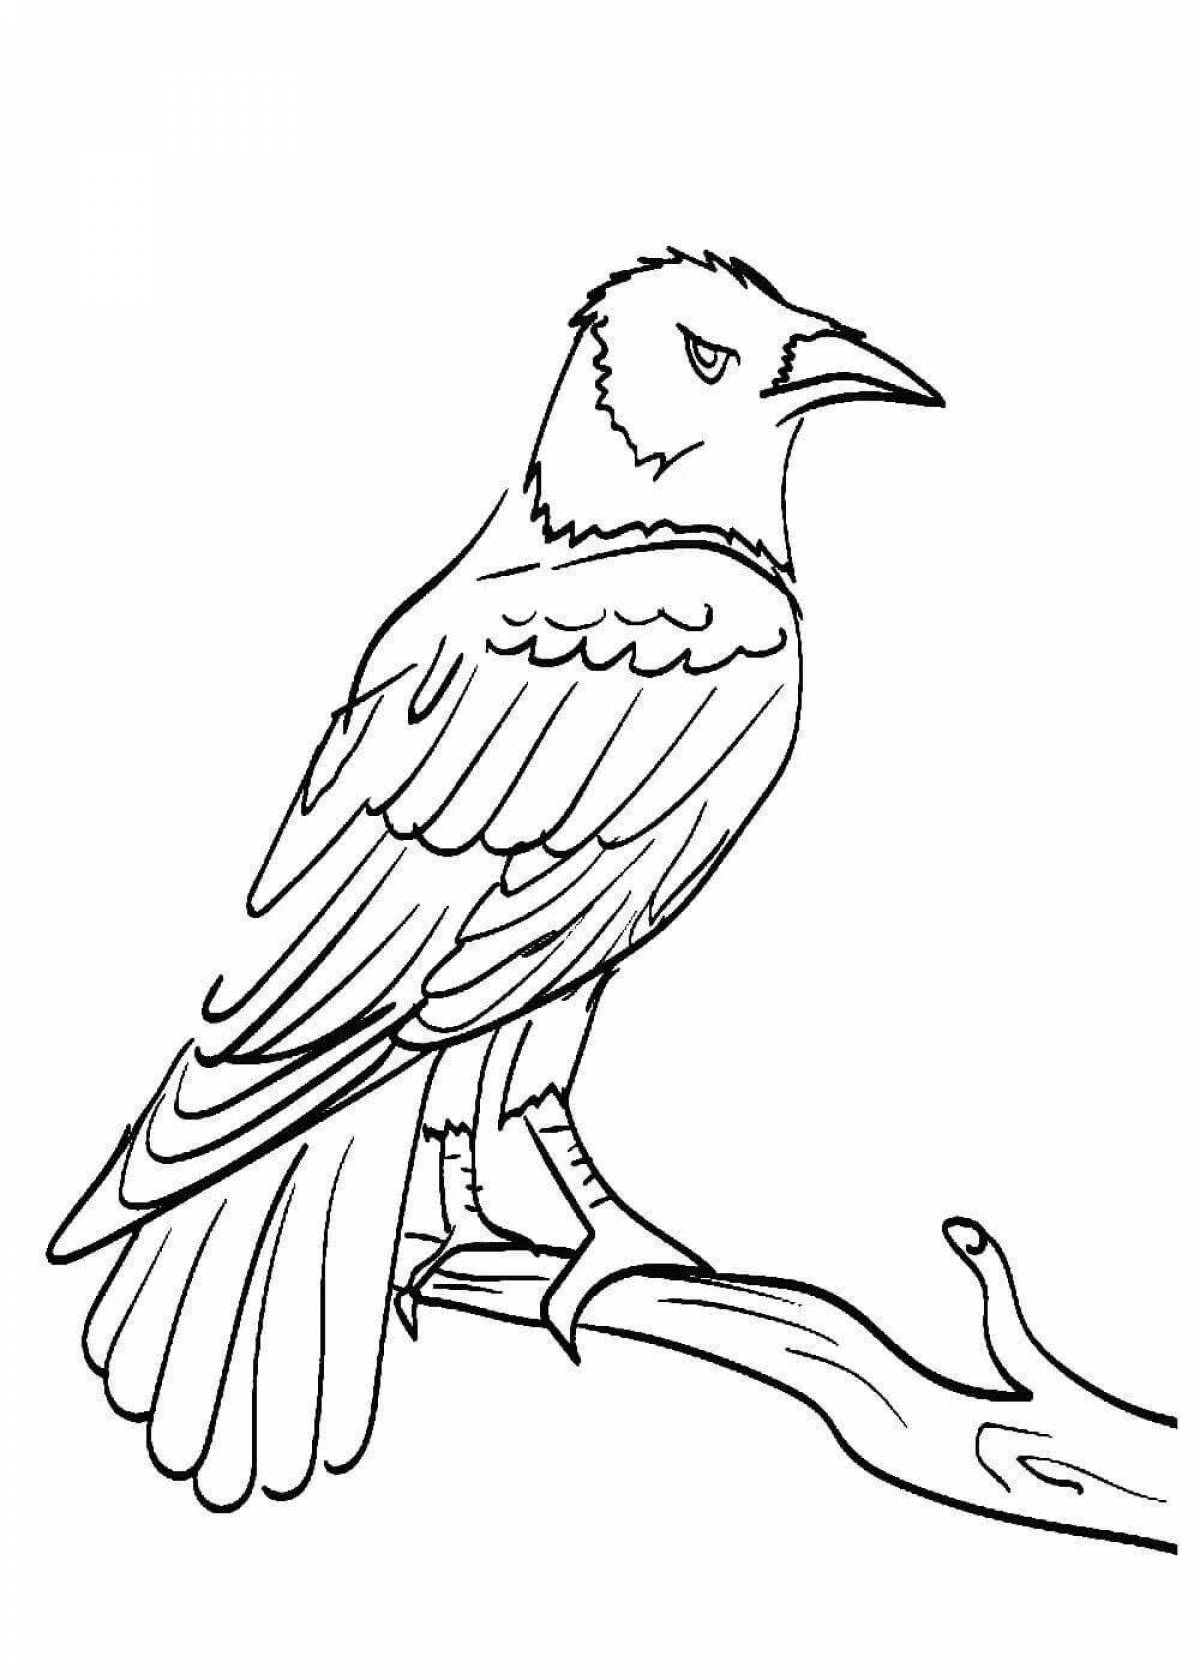 Magic crow coloring book for children 6-7 years old